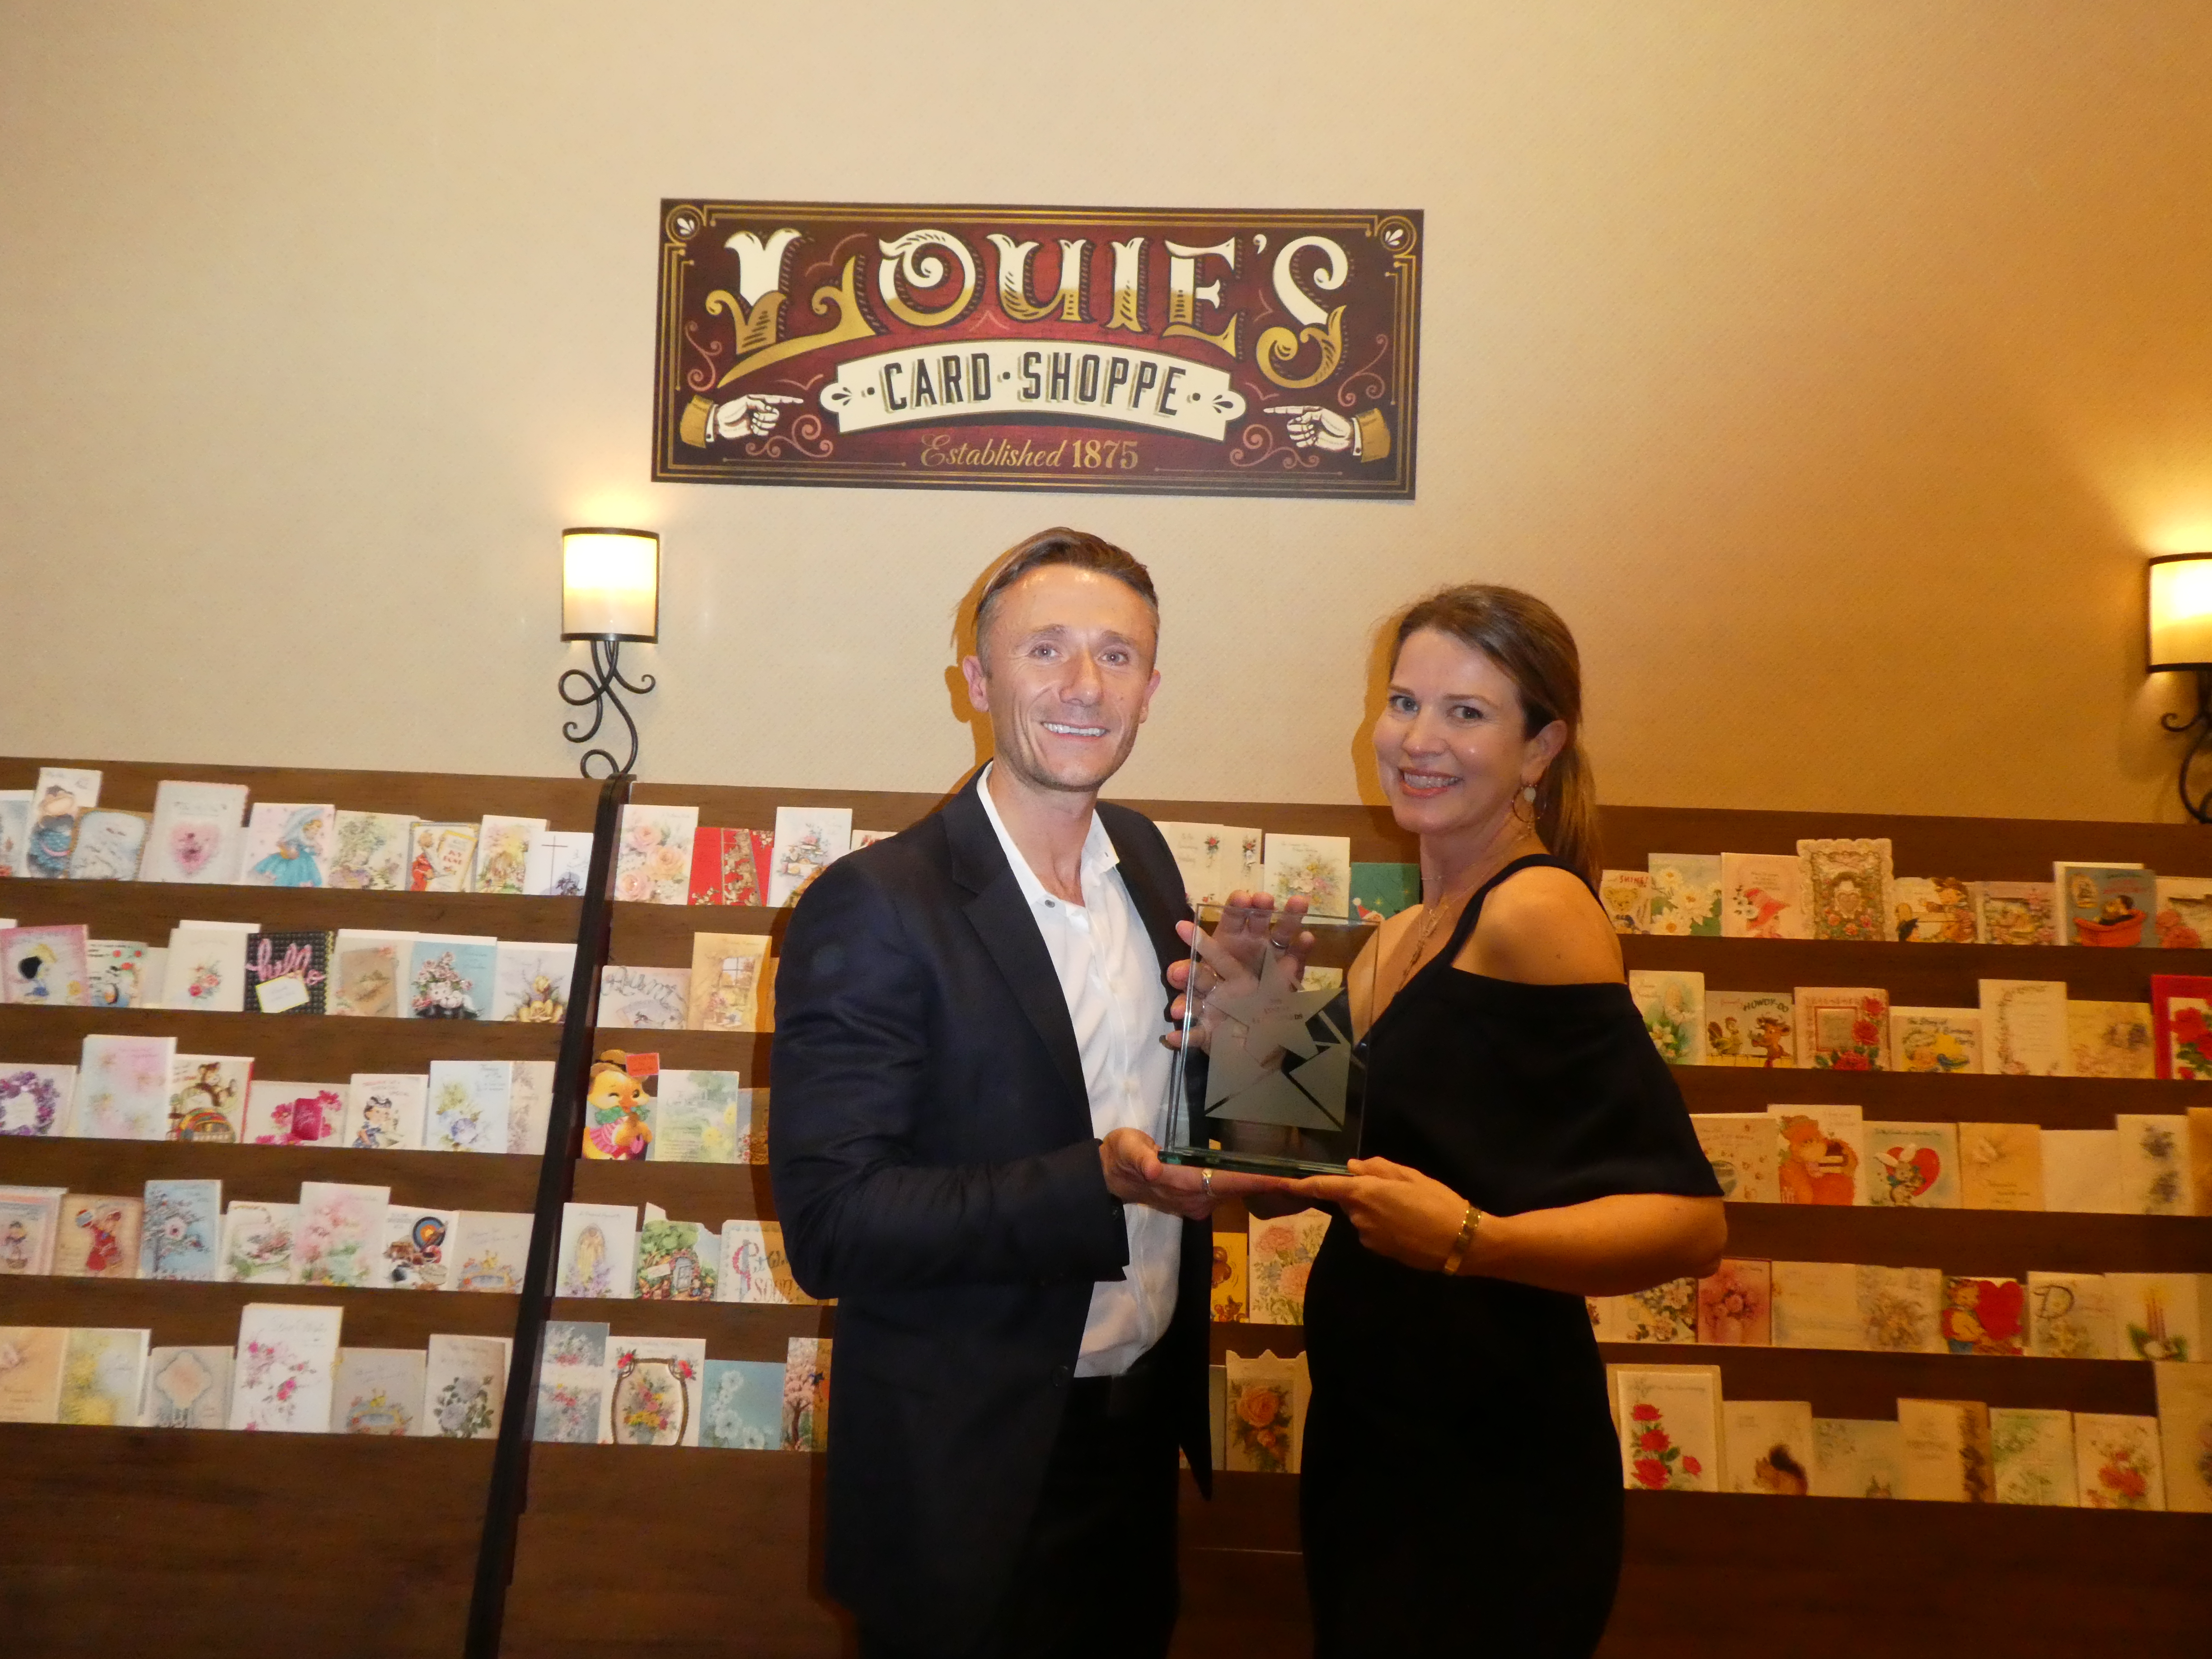 Above: Think of Me’s Dan and Freya Kane at last year’s Louies’ event with their trophy.